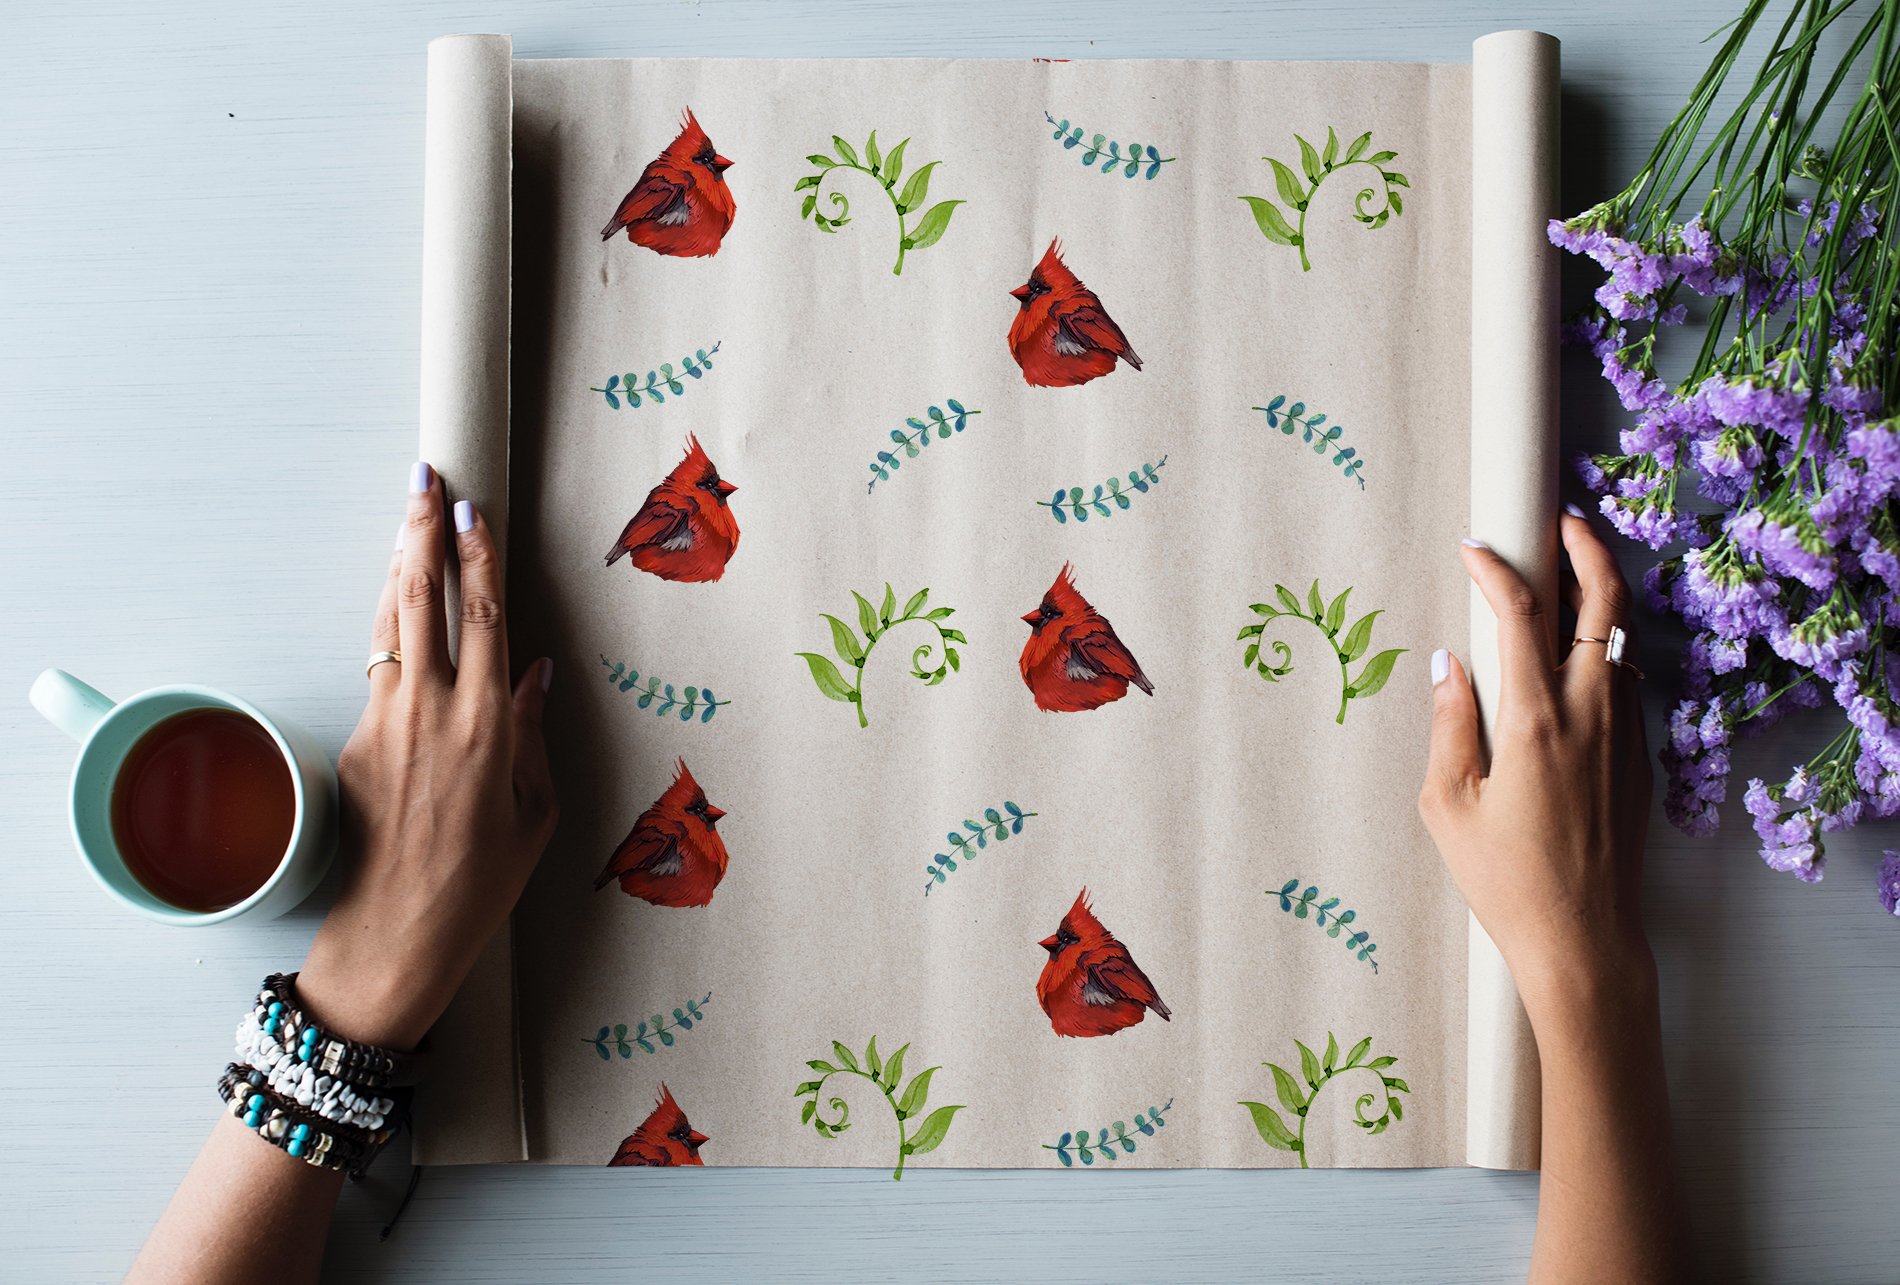 Minimalistic fabric with red birds.